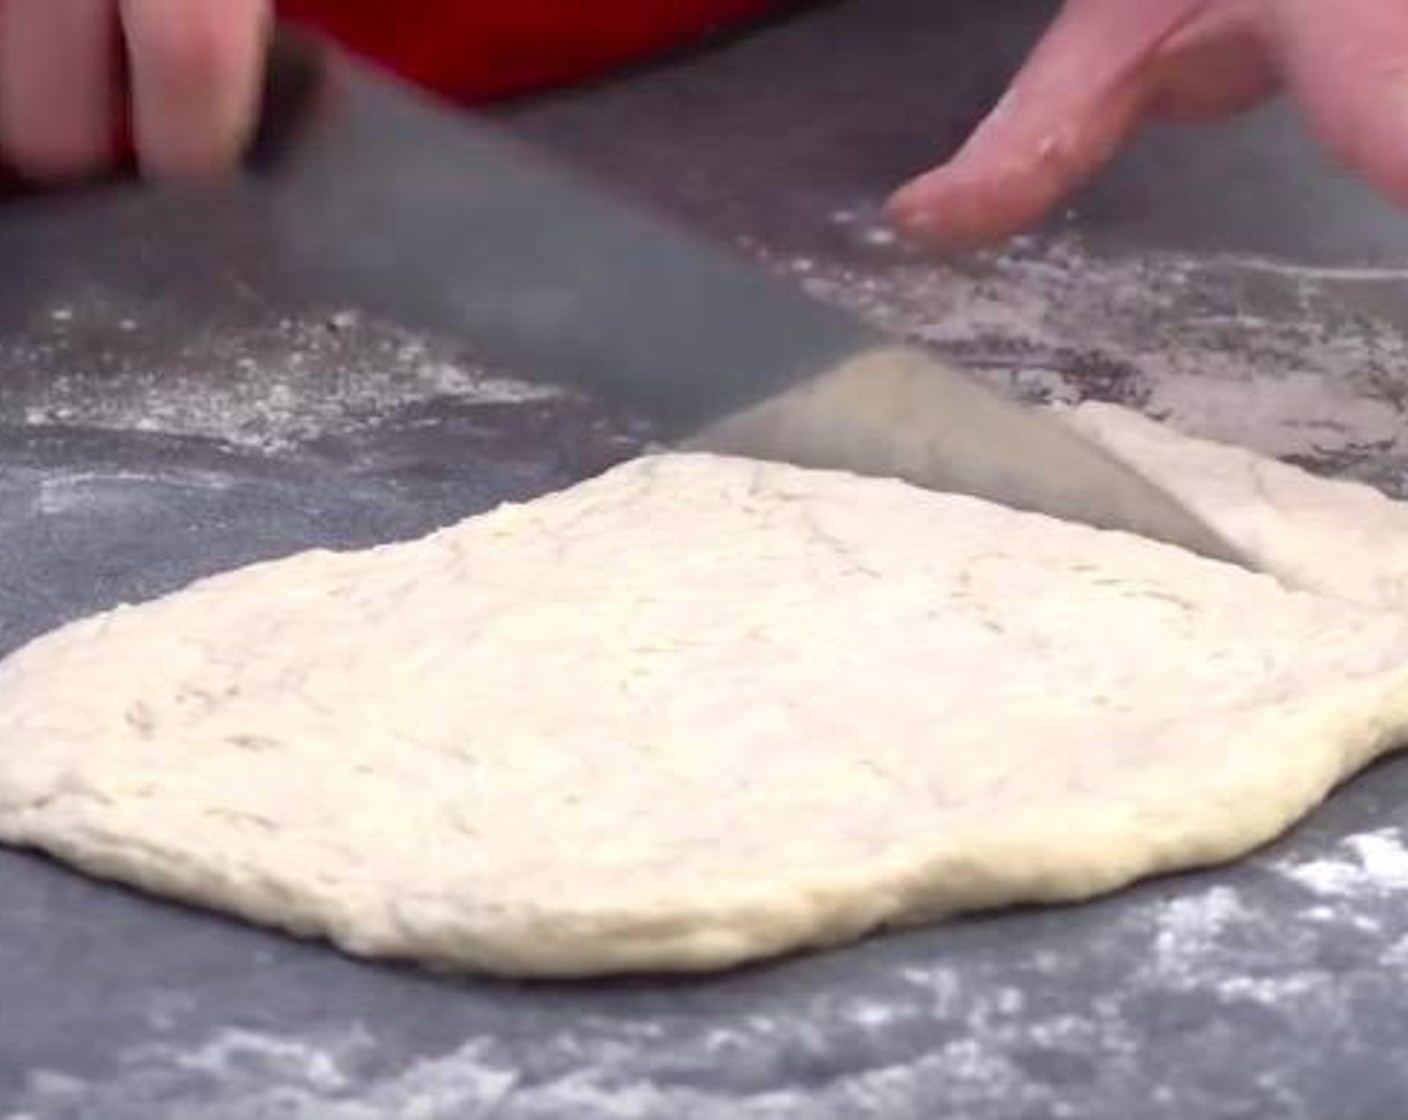 step 2 Lightly flour the surface, turn the dough onto the surface and lightly knead it until it's smooth and elastic. Use a hand to press it out until it's about 1 centimeter or half an inch thick. Take a sharp knife to cut the dough into small squares.